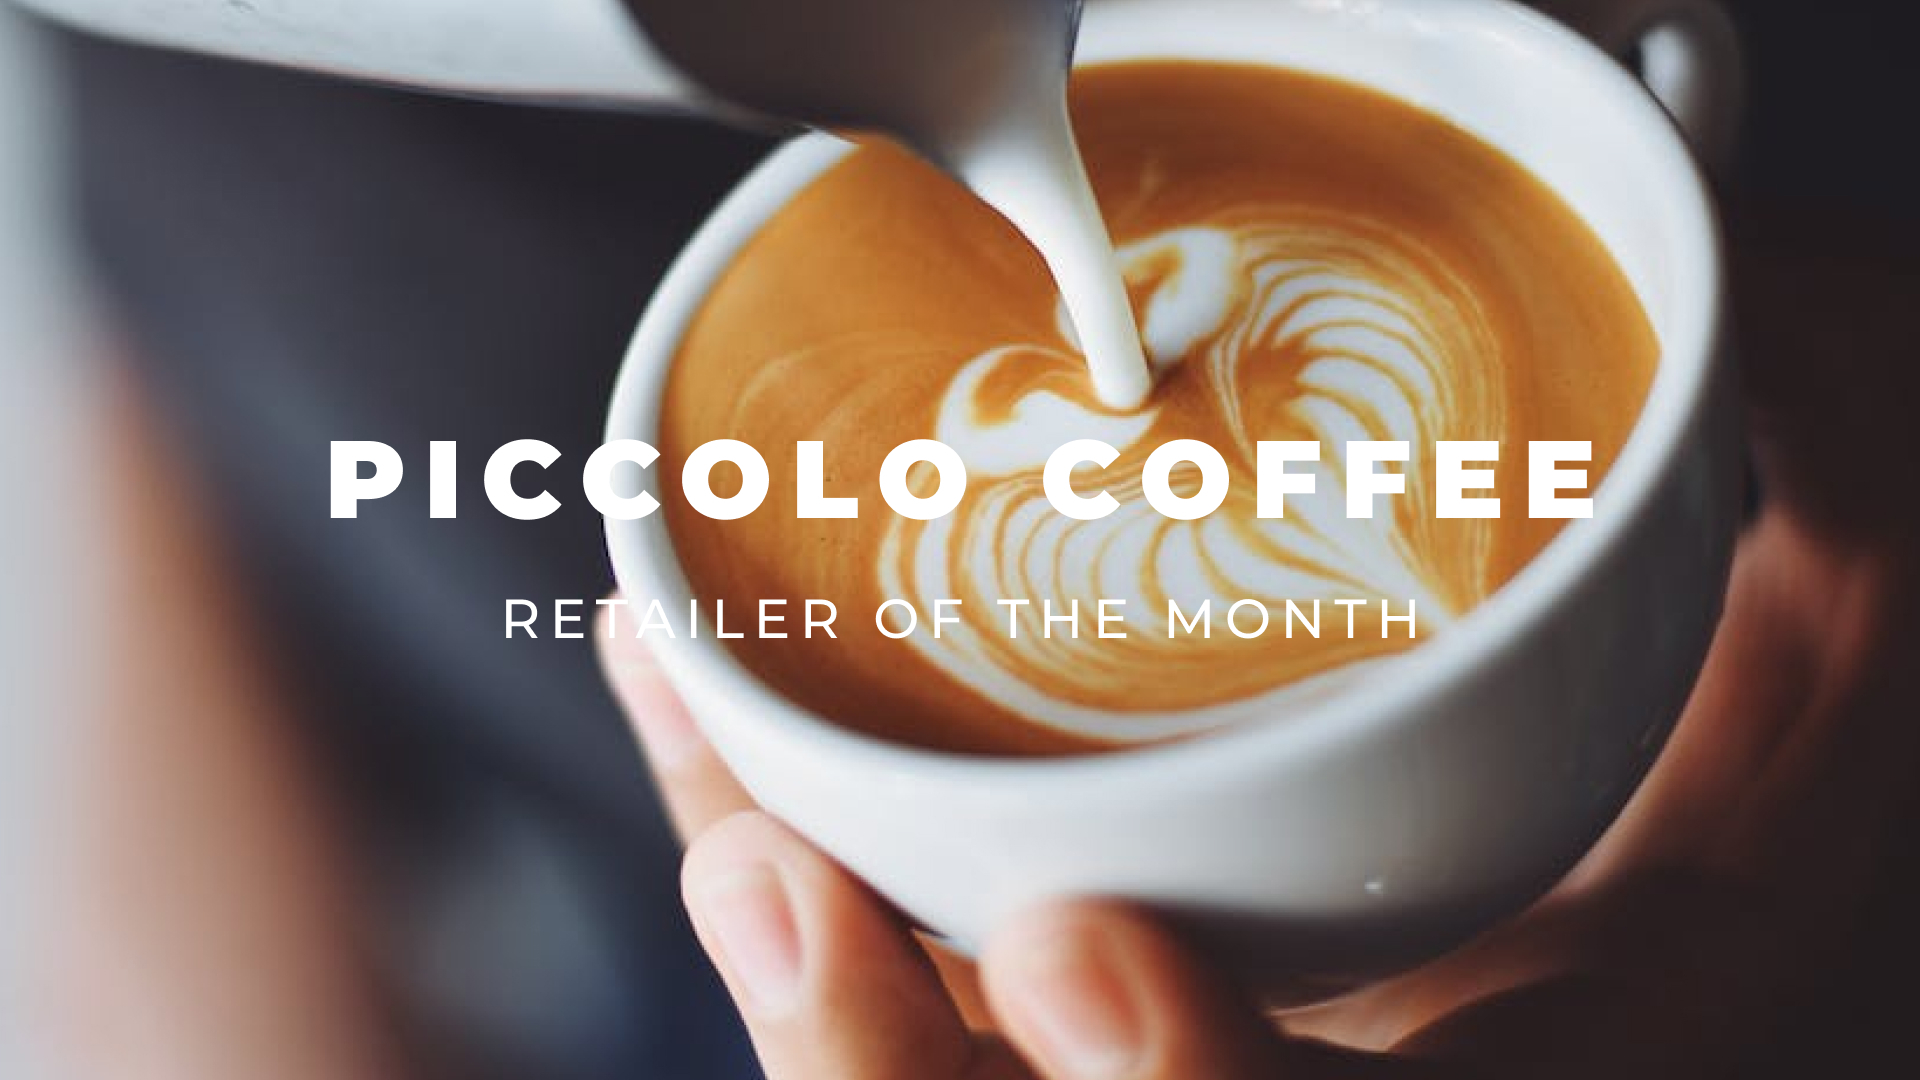 Retailer of the month: Piccolo Coffee